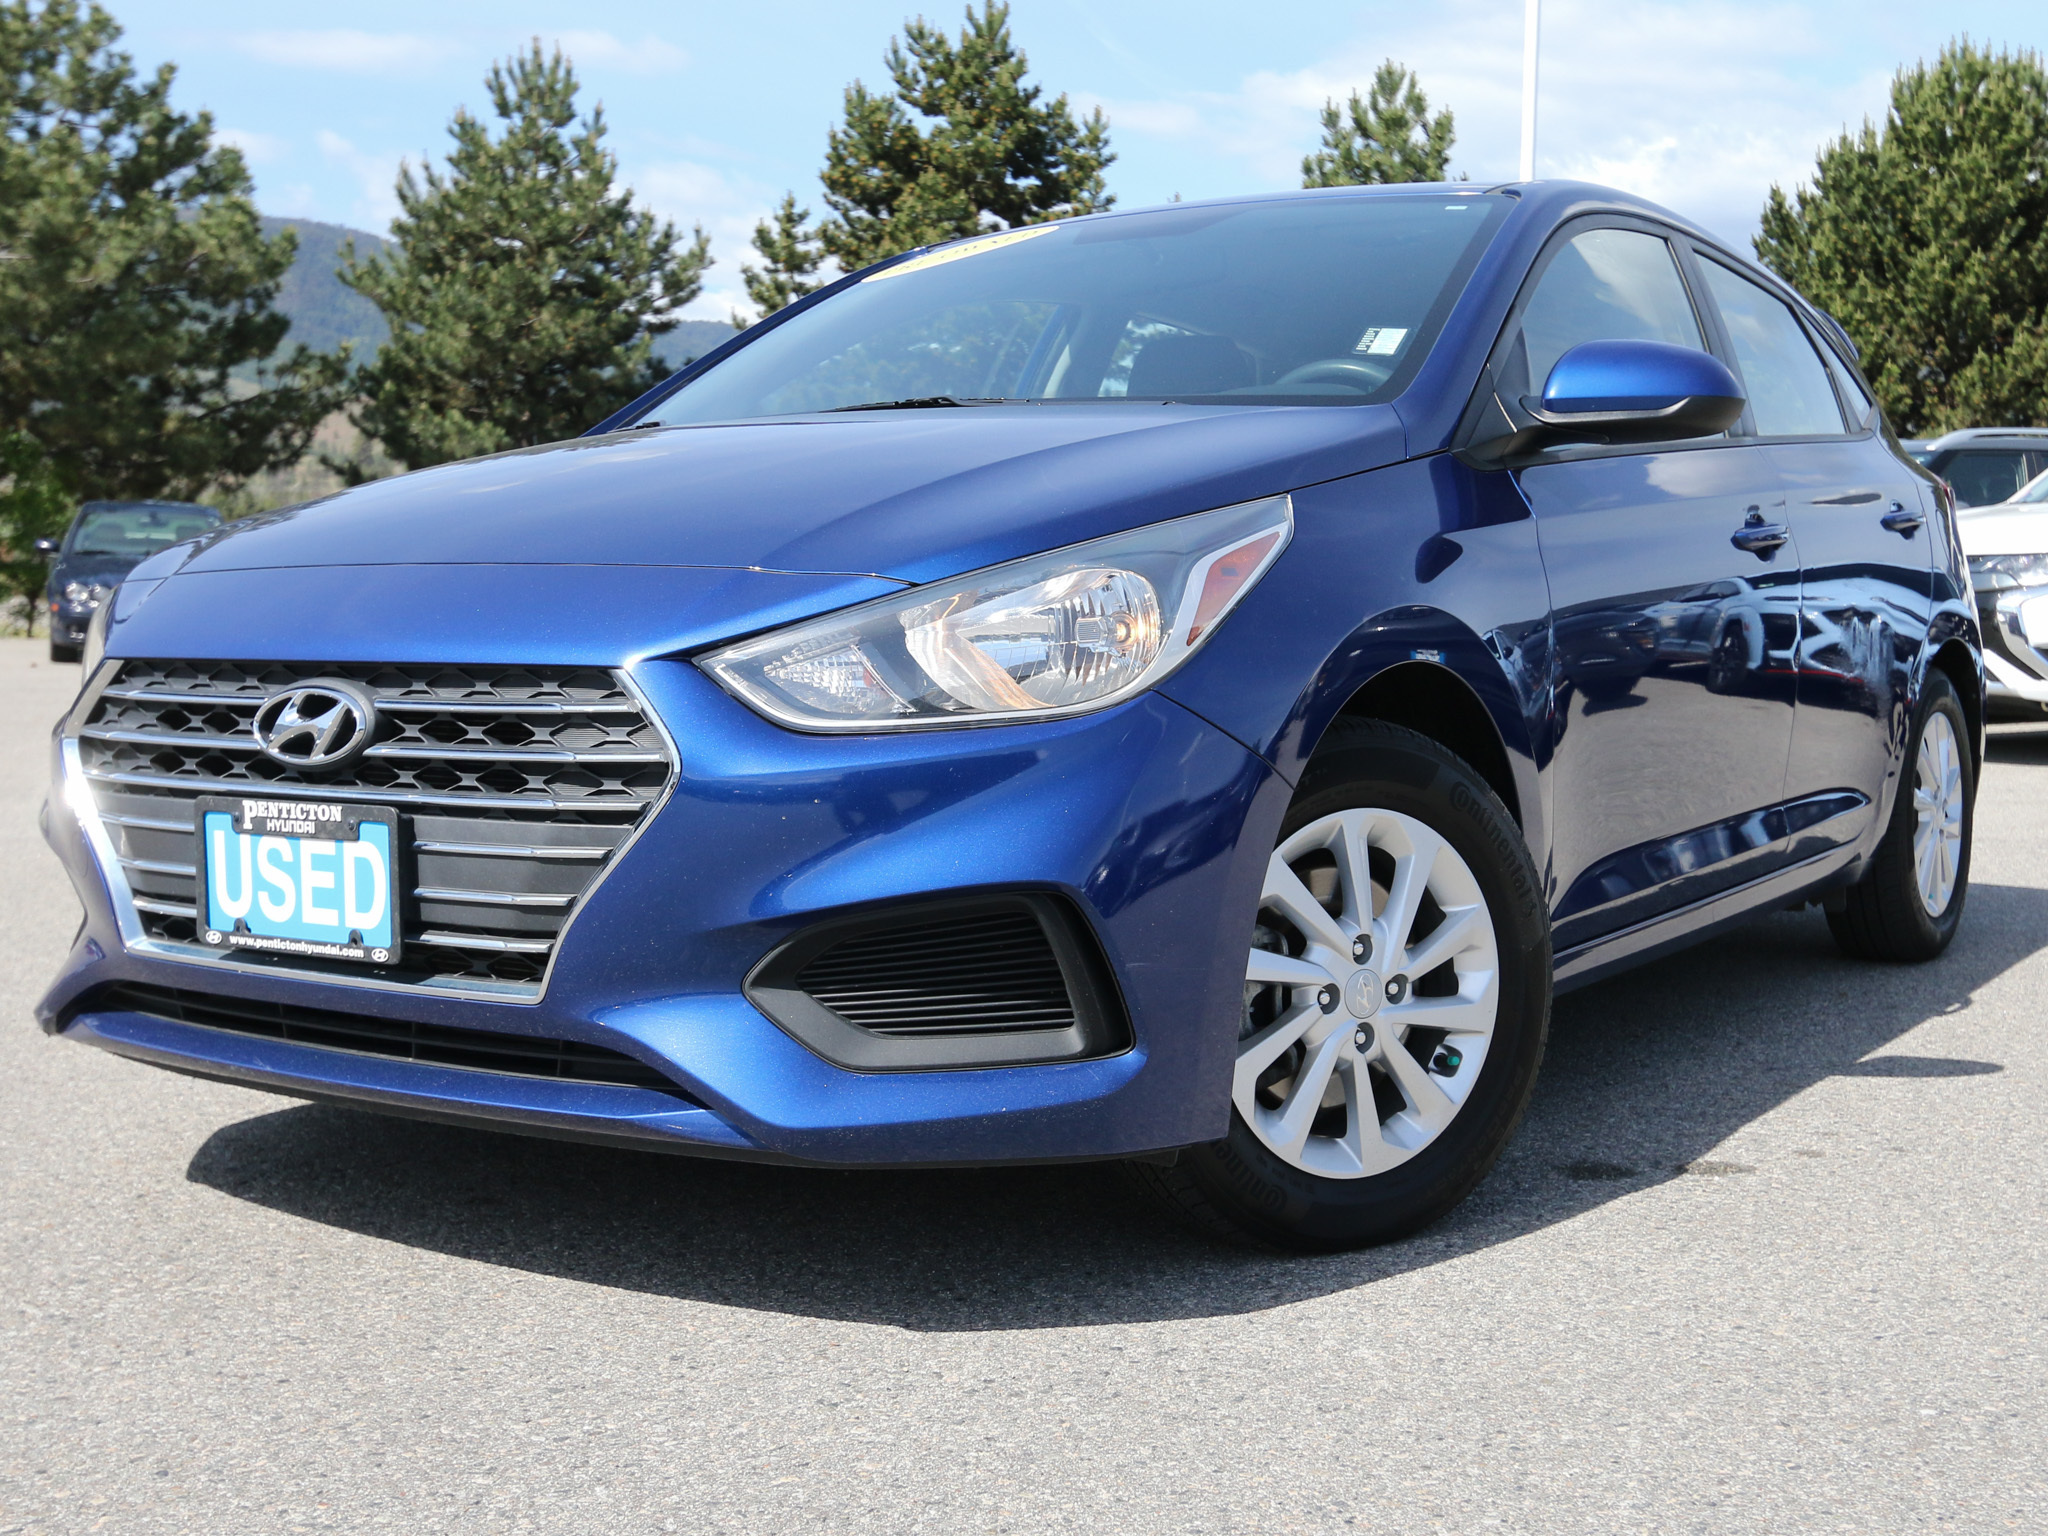 2019 Hyundai Accent  Preferred - FWD - Power Steering - Cruise Control